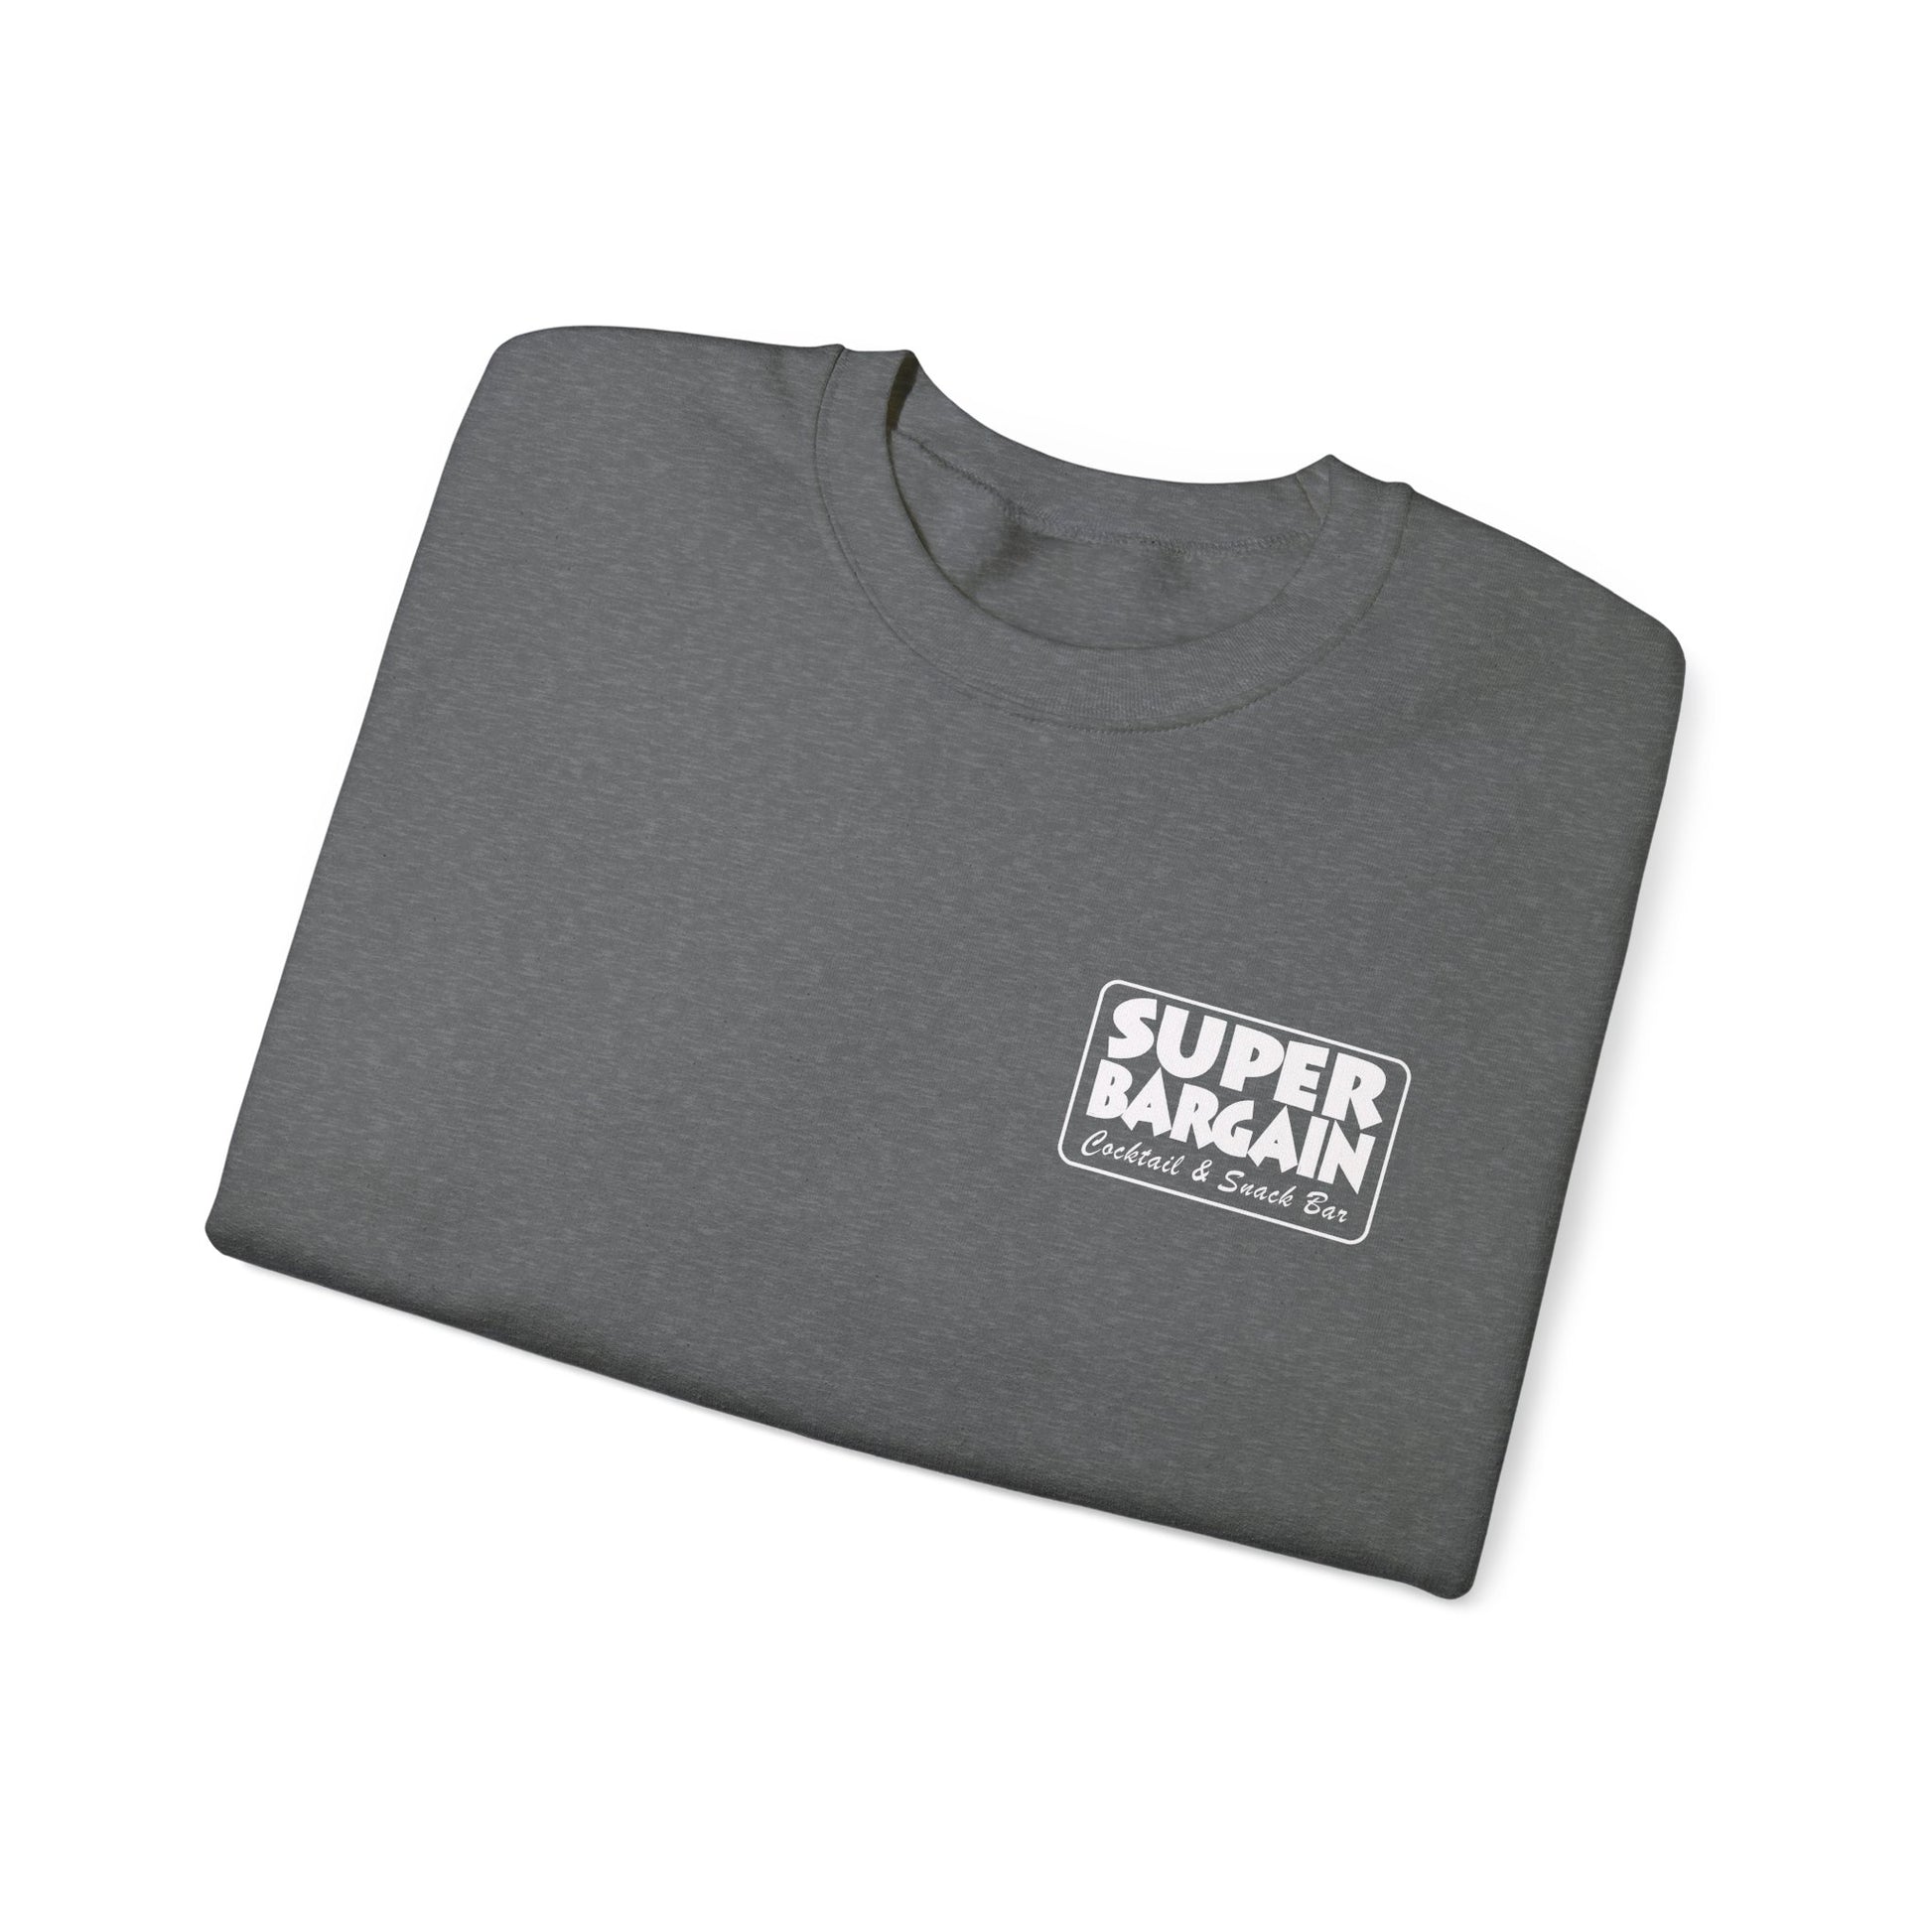 A folded Unisex Heavy Blend™ Crewneck Monochrome Logo Sweatshirt with a white logo labeled "Super Bargain, Celebrating A Great Era in Cabbagetown, Toronto" on the chest, presented on a plain white background.